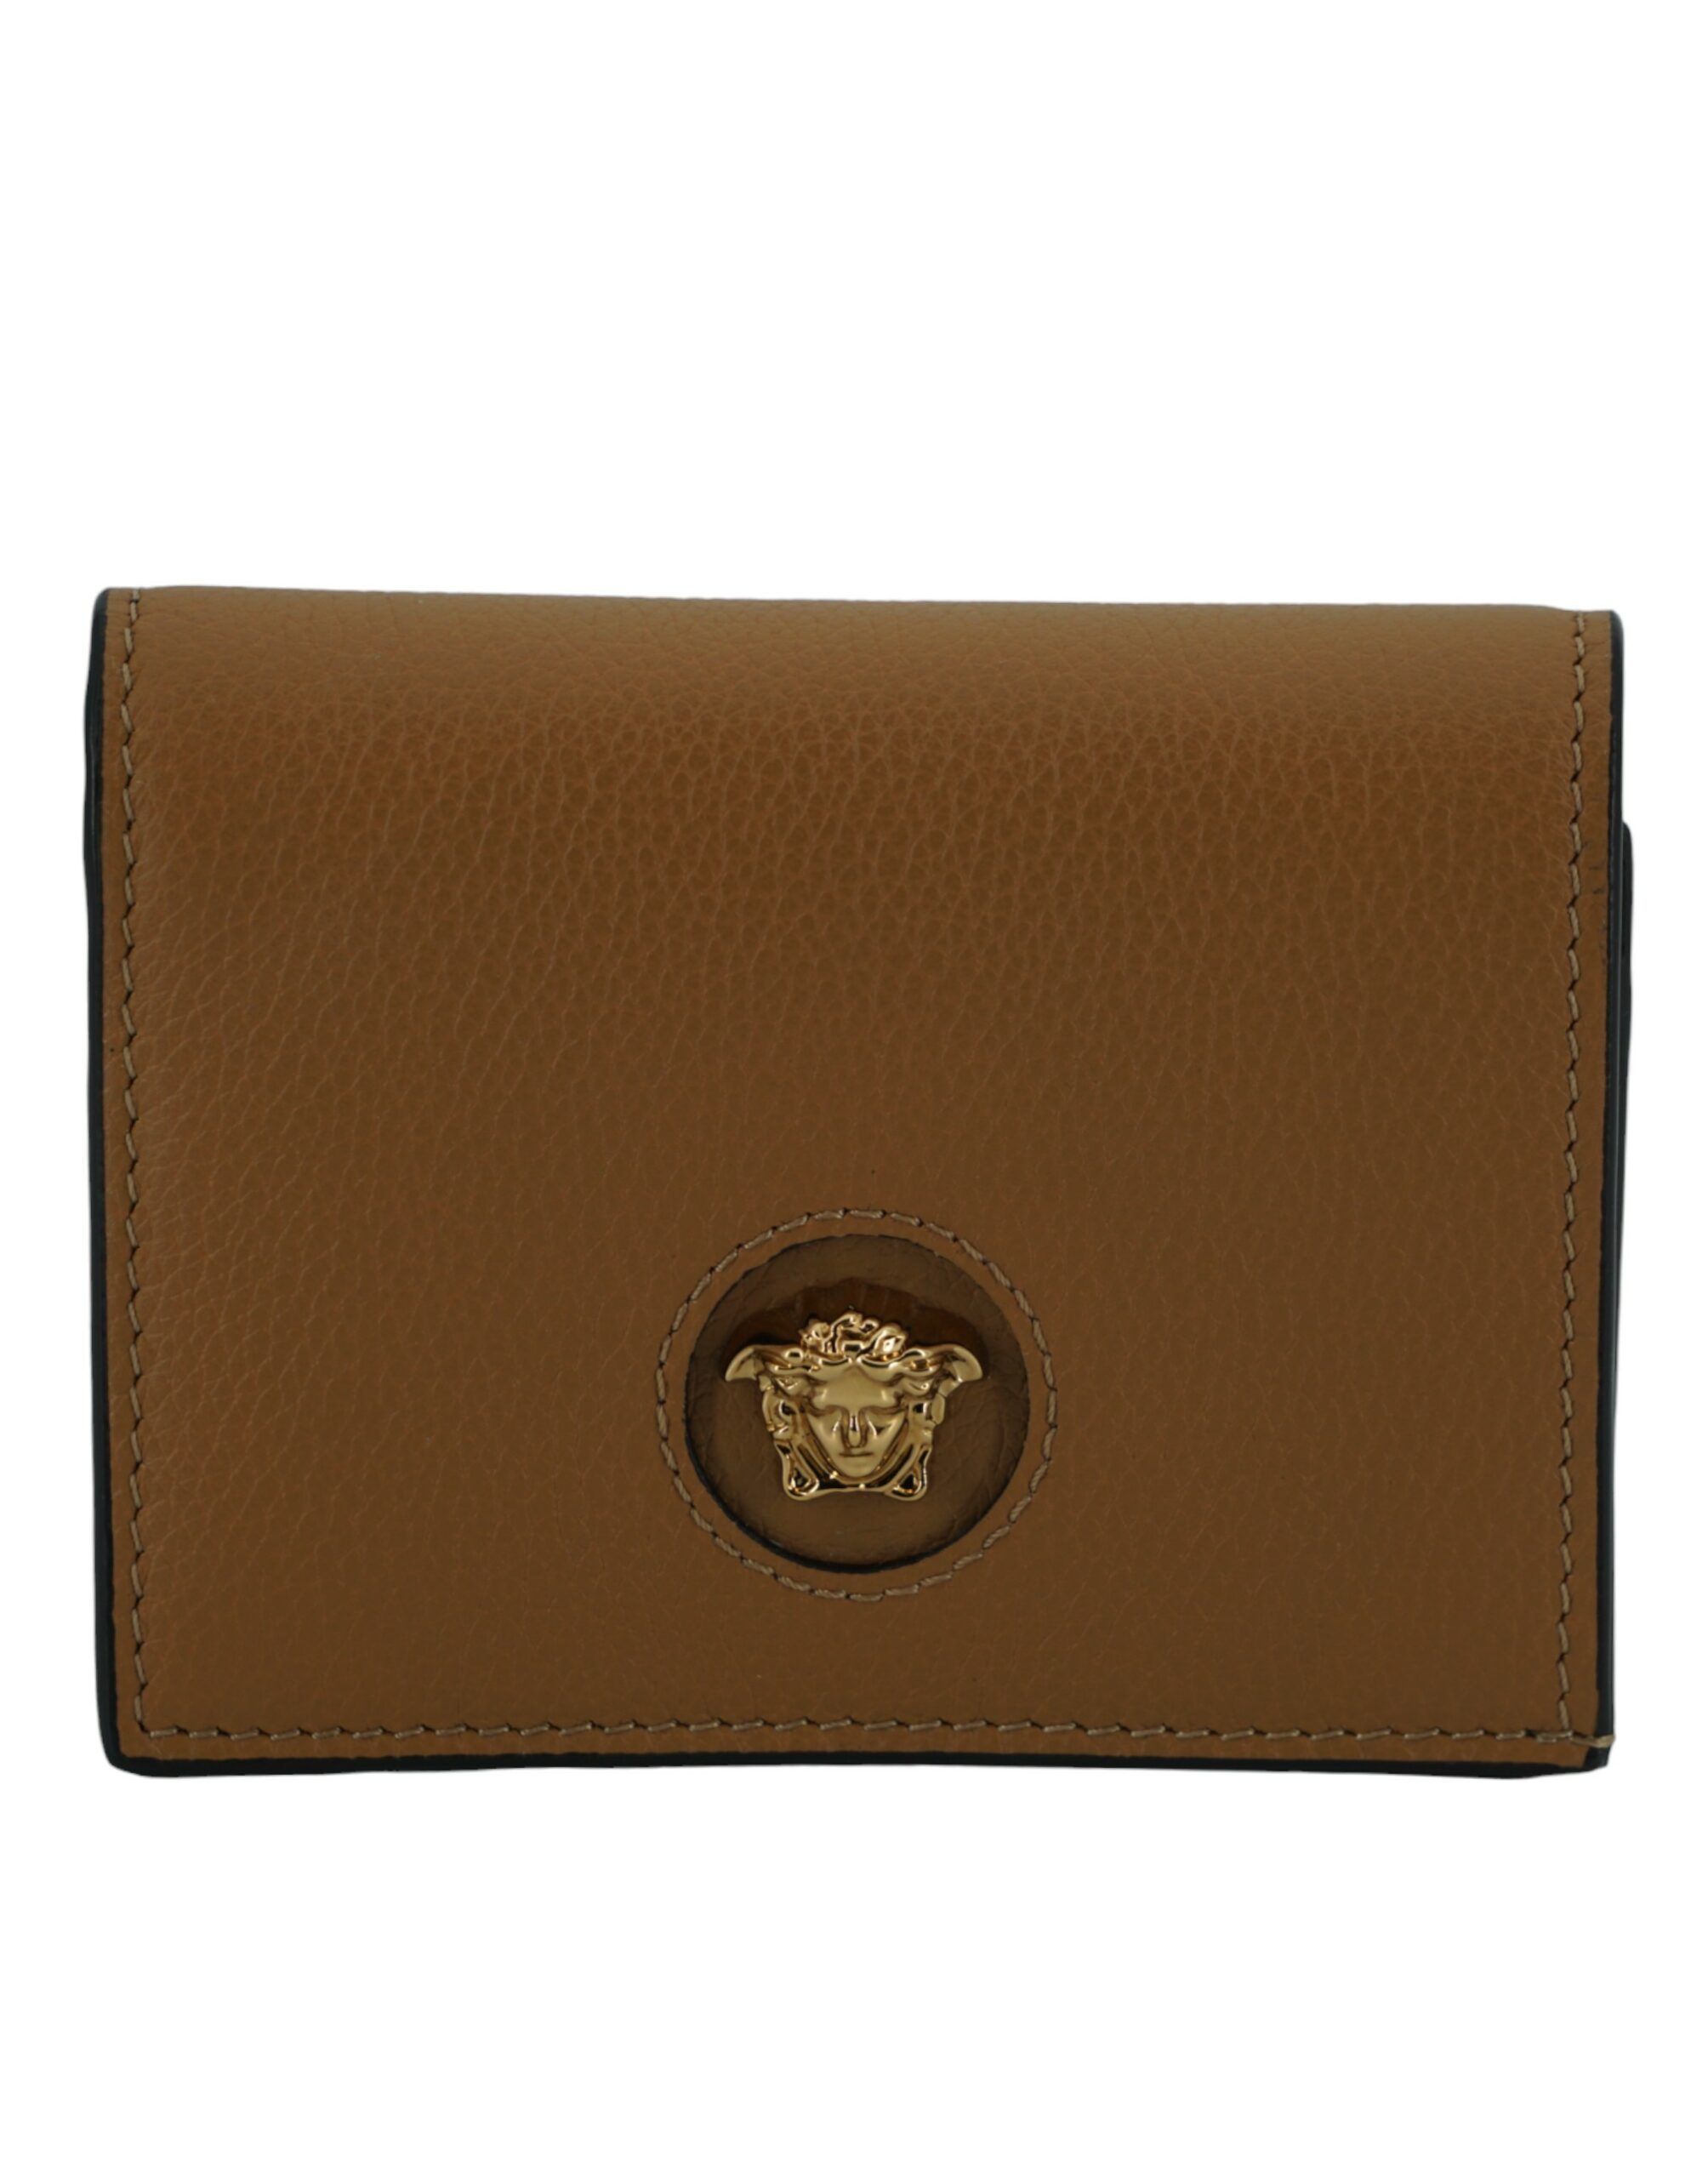 Calf Leather Compact Wallet with Medusa Head Logo